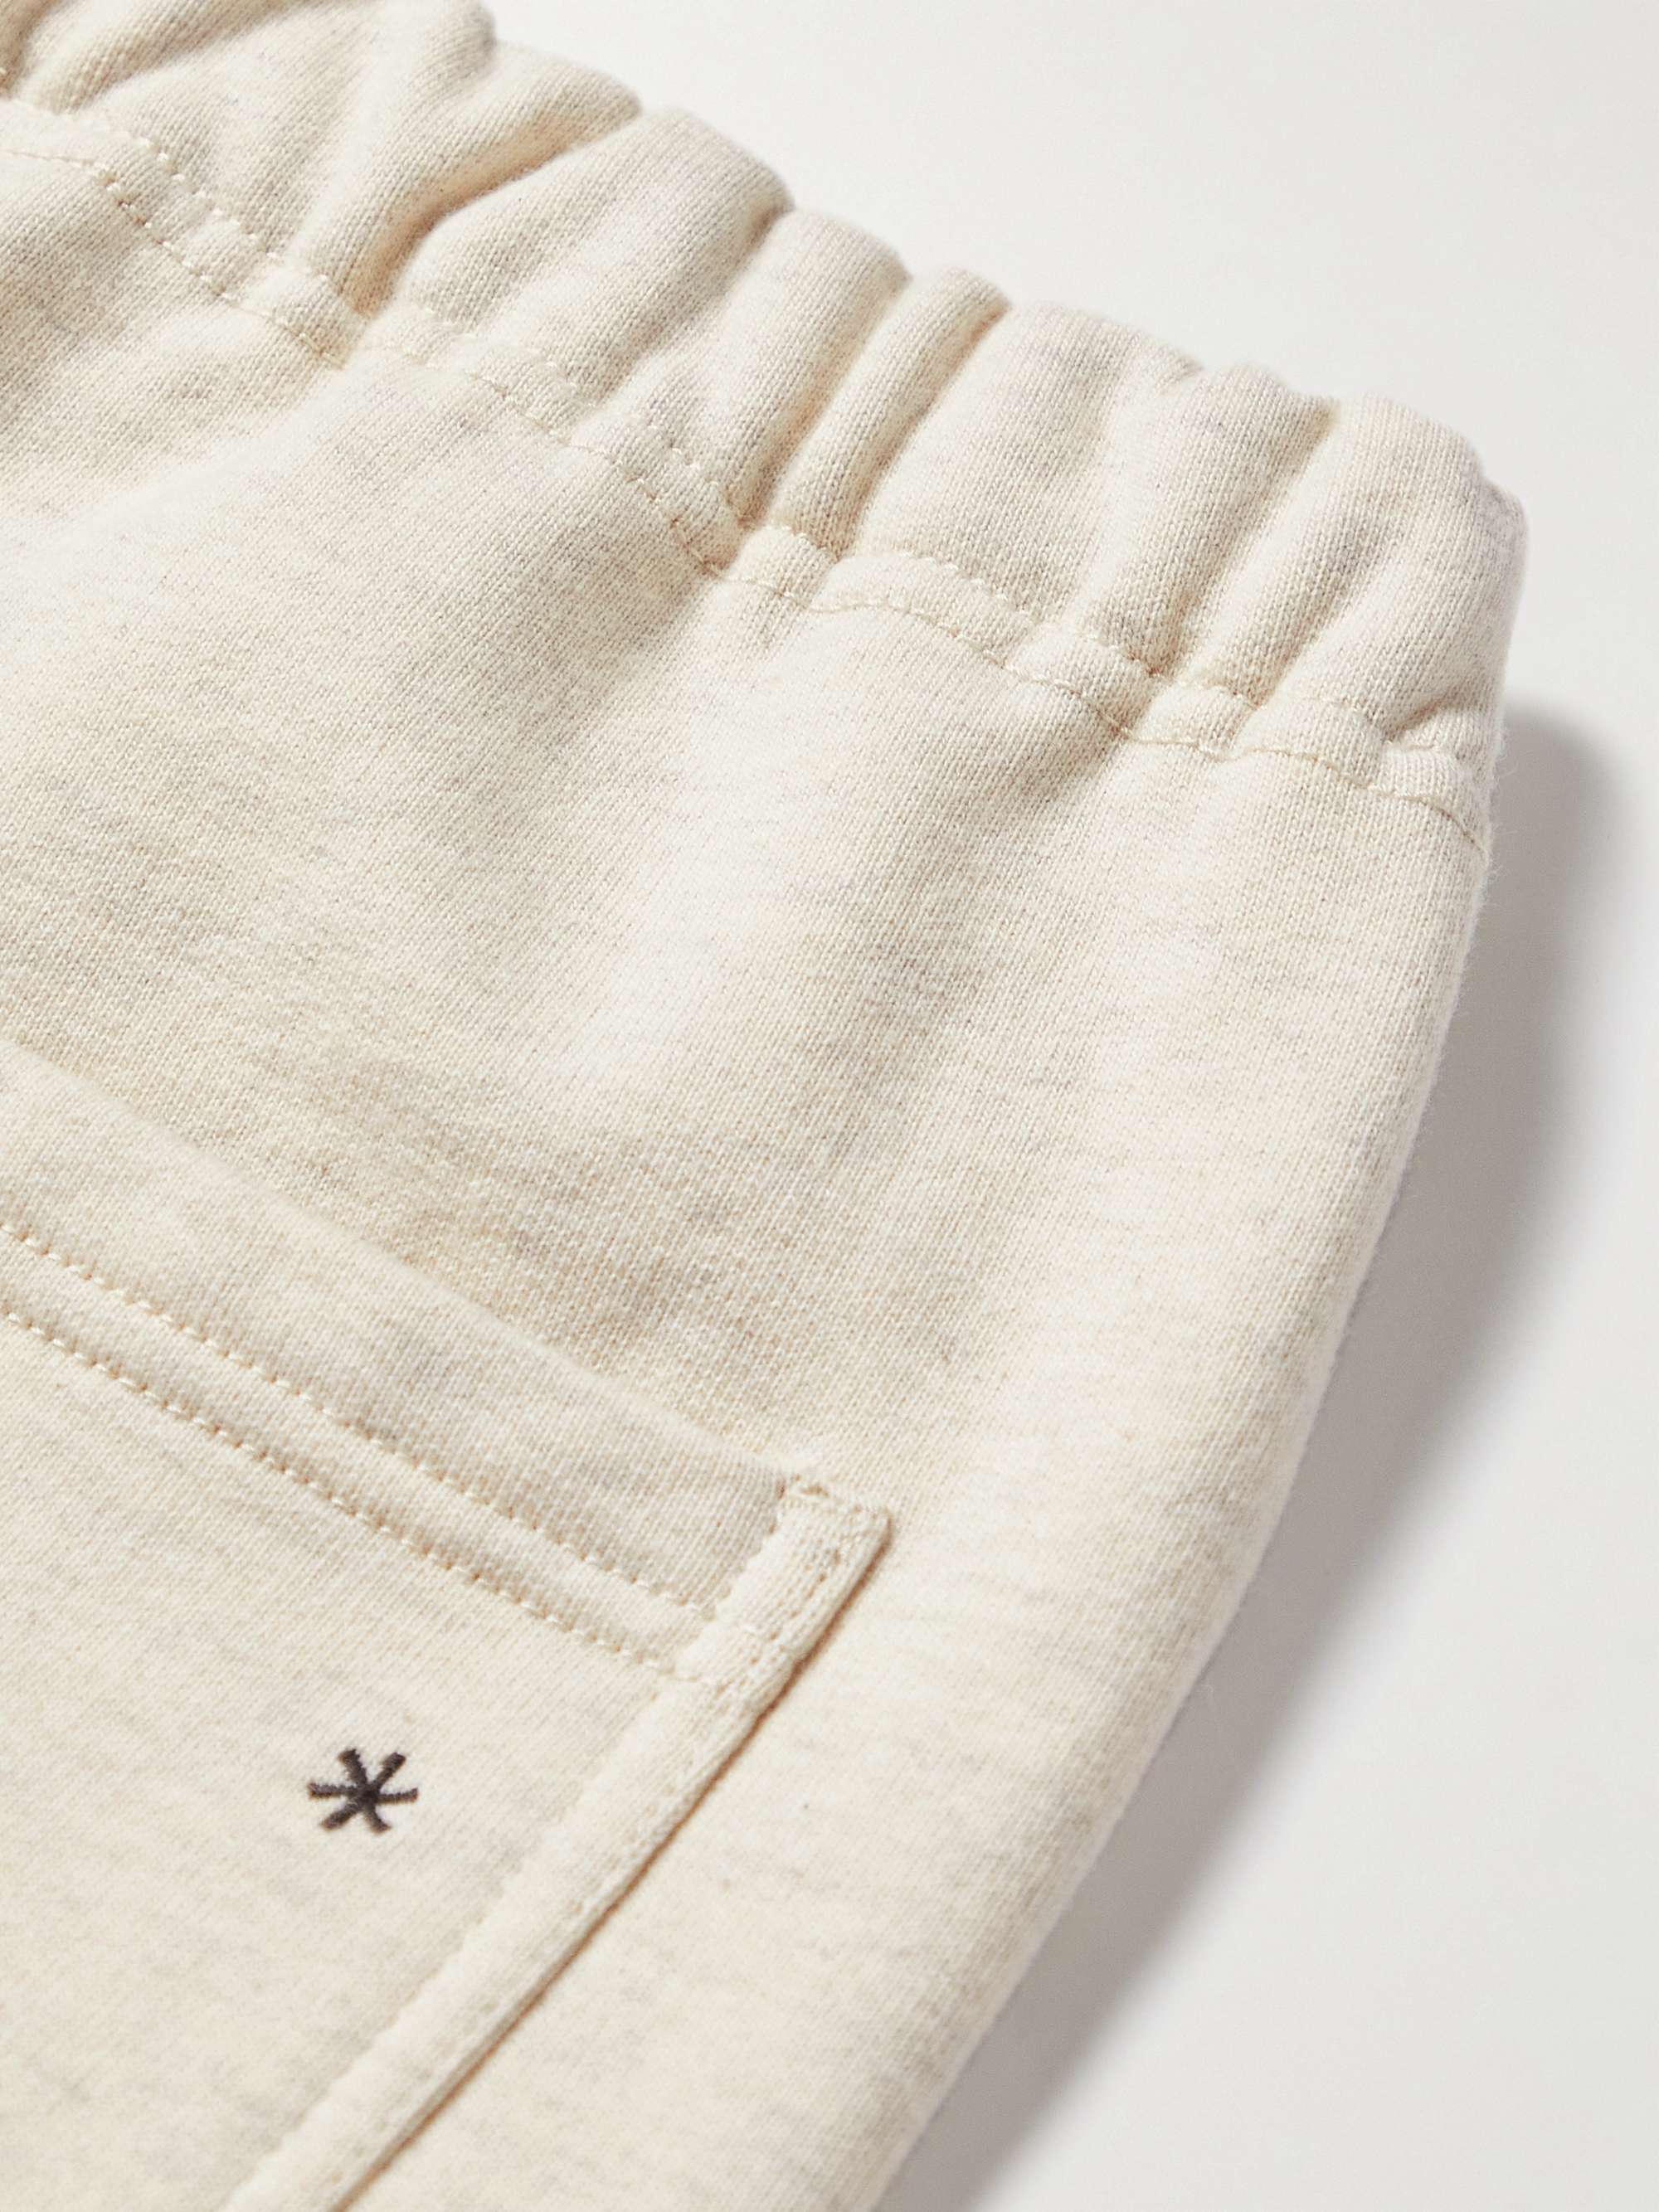 SNOW PEAK Tapered Recycled Cotton-Jersey Sweatpants